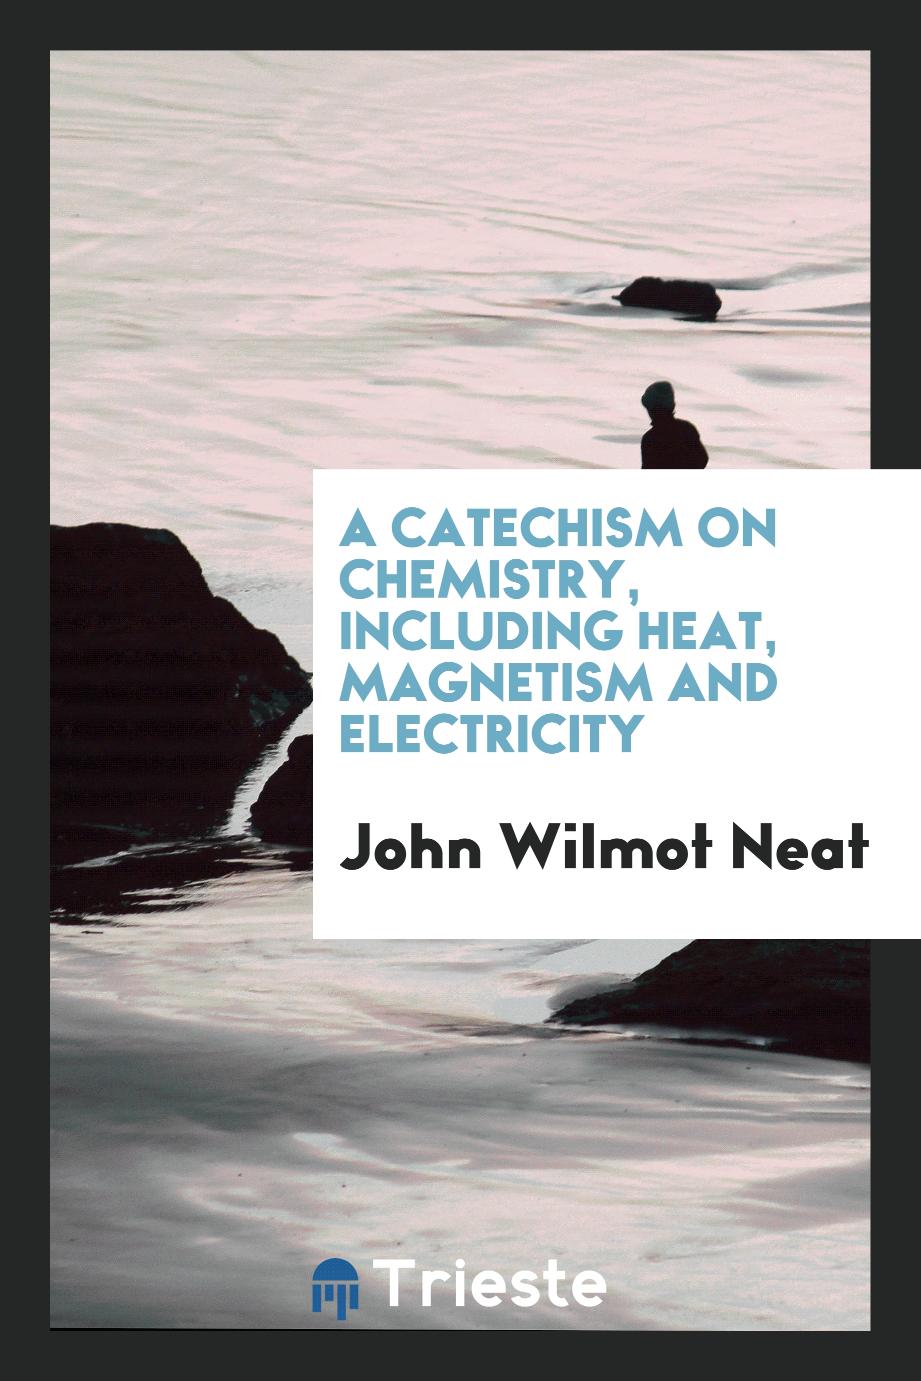 A catechism on chemistry, including heat, magnetism and electricity